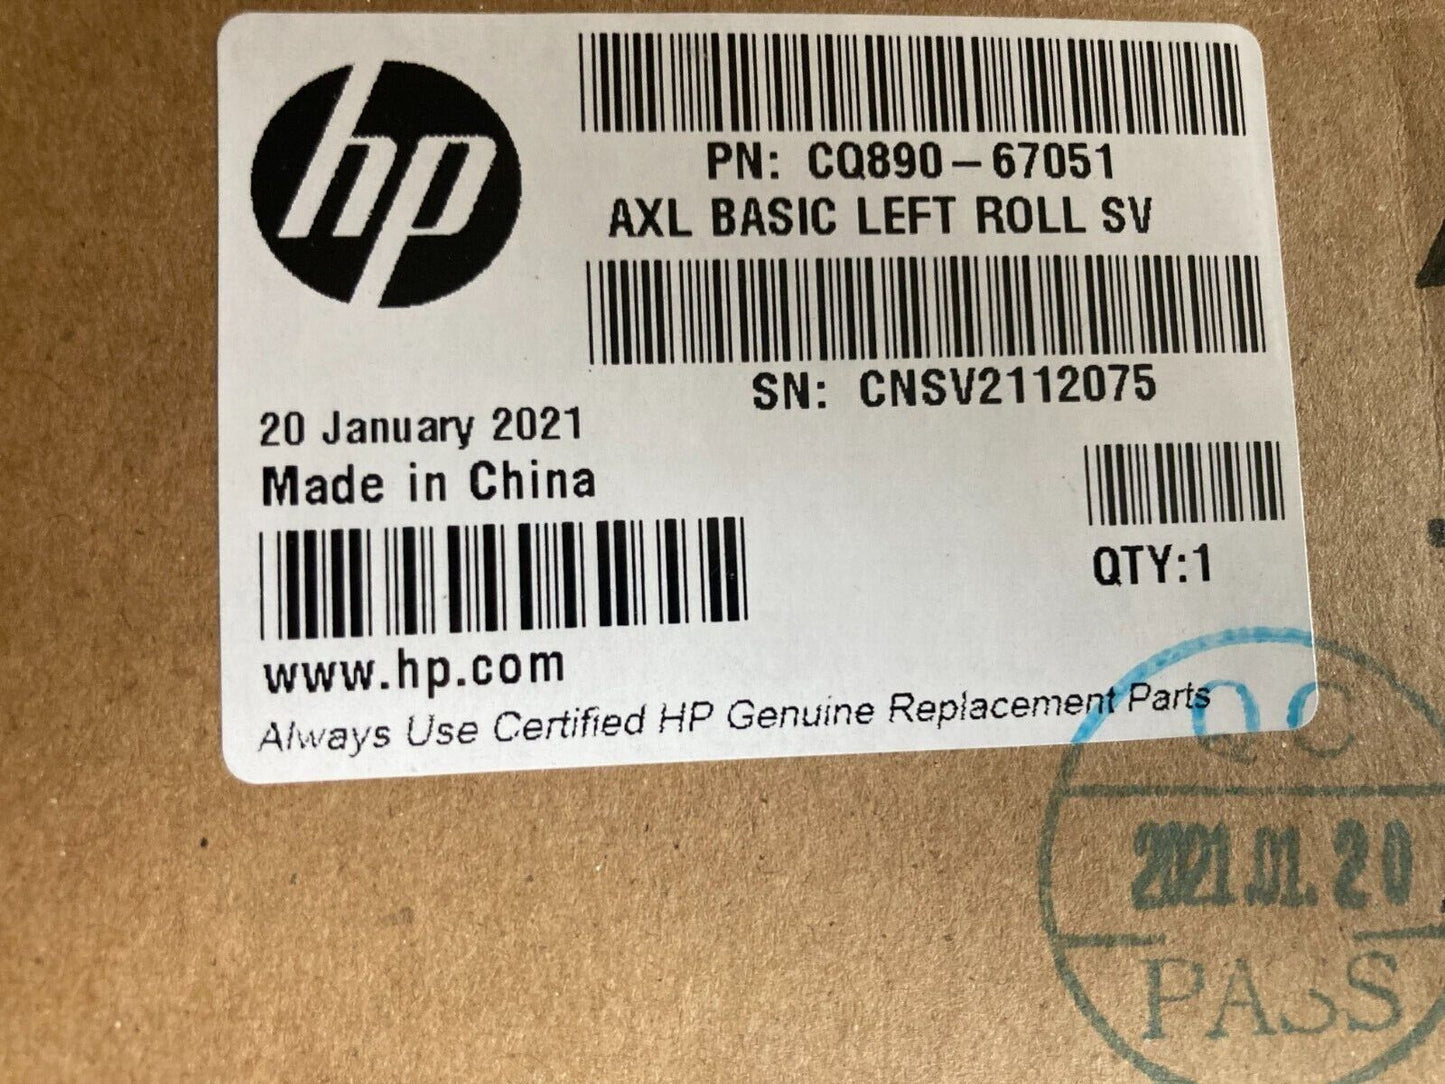 NEW CQ890-67051 Left Roll Support With Rewinder HP Designjet T120 T520 T730 T830